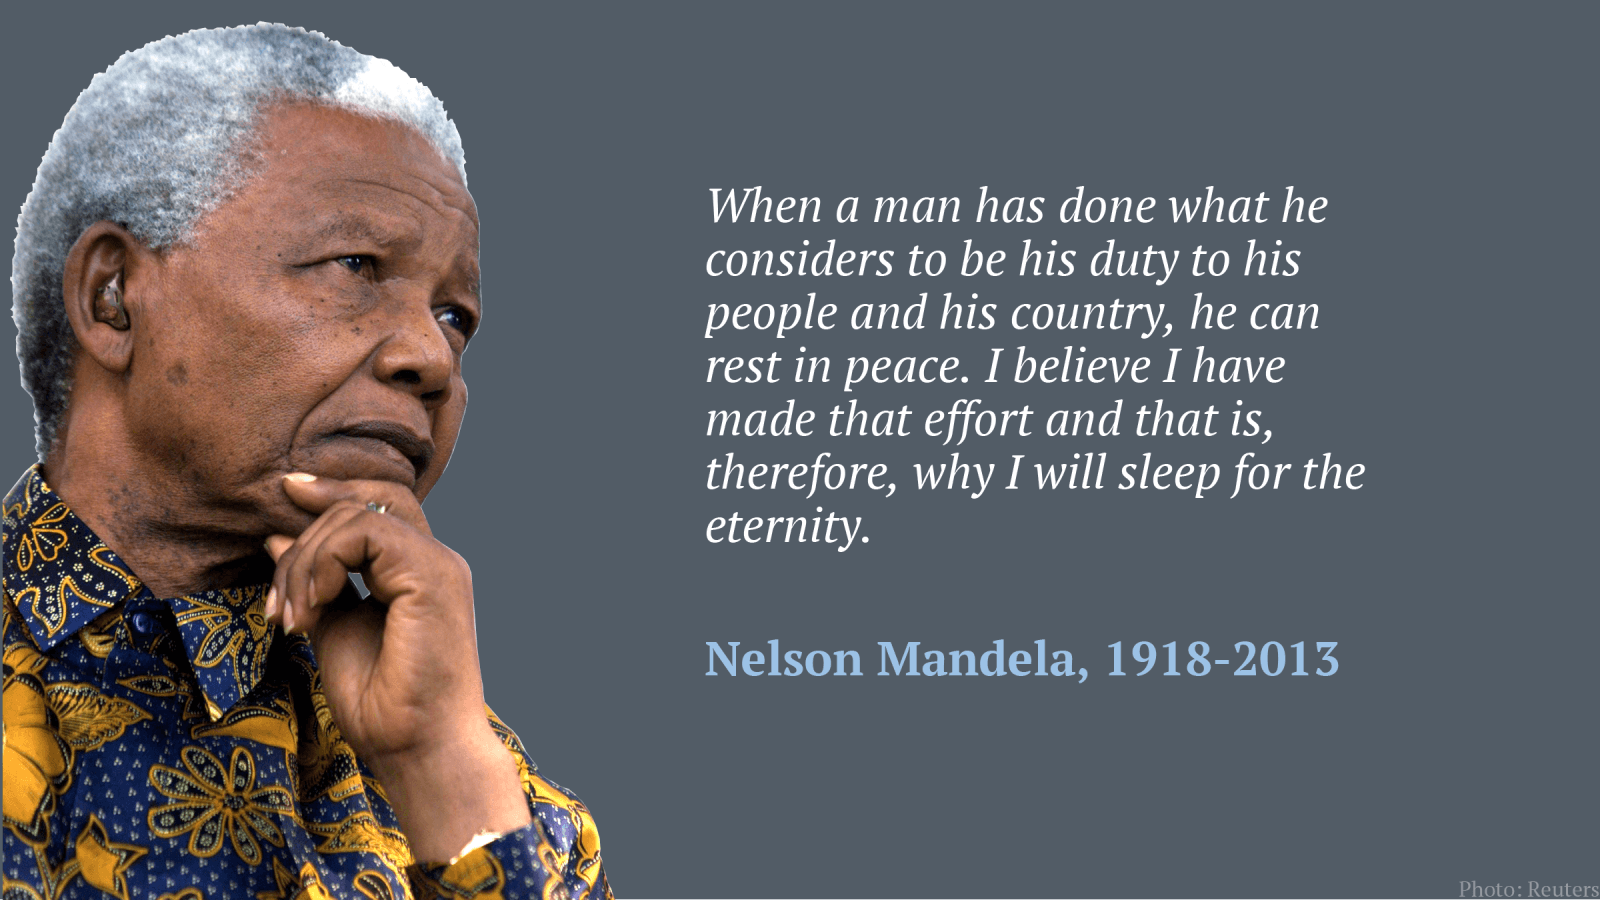 The wisdom of Nelson Mandela: quotes from the most inspiring